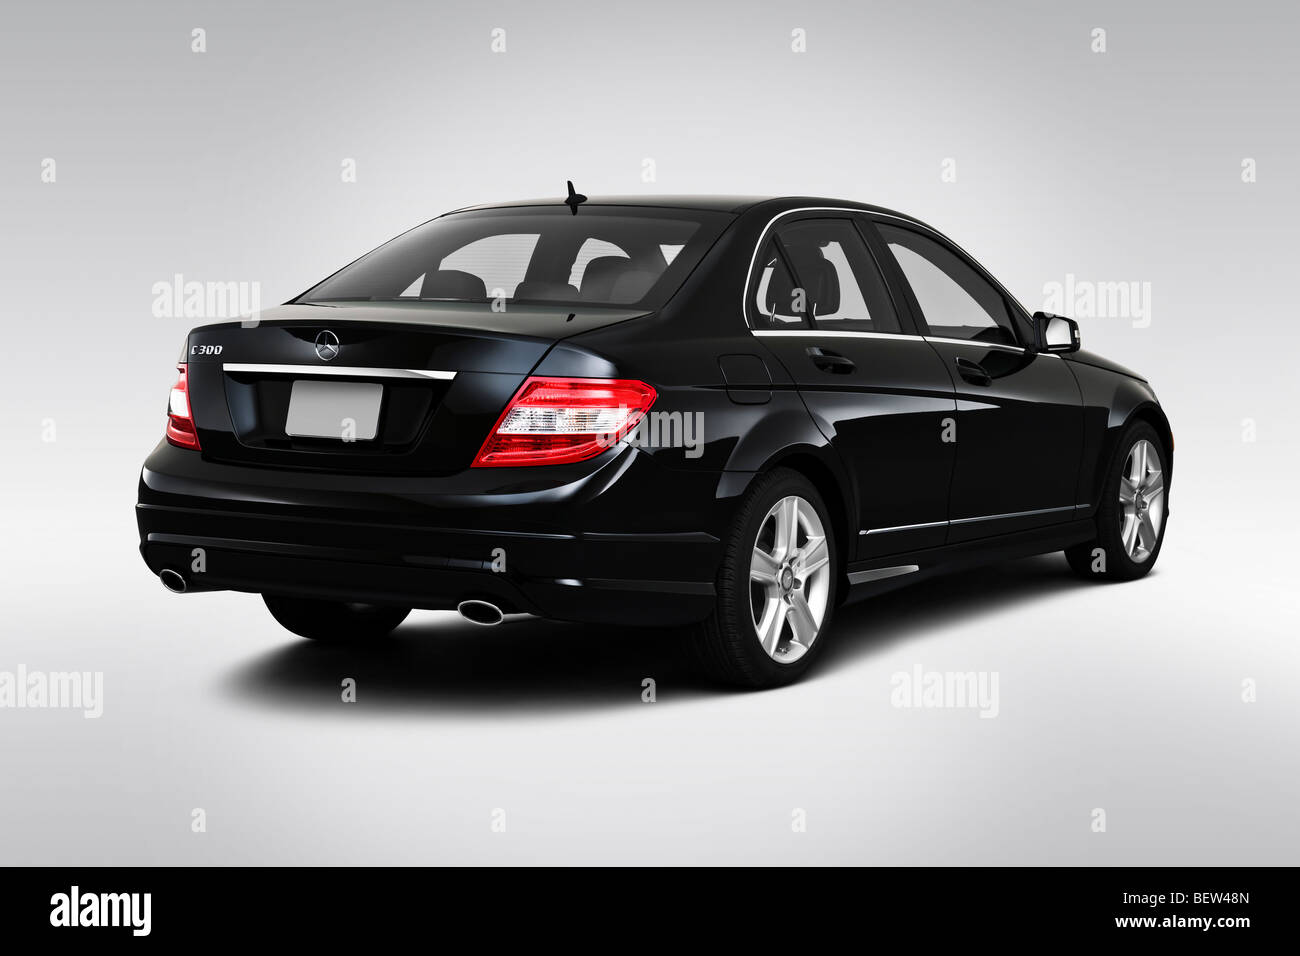 2010 Mercedes-Benz C-Class C300 in Black - Rear angle view Stock Photo